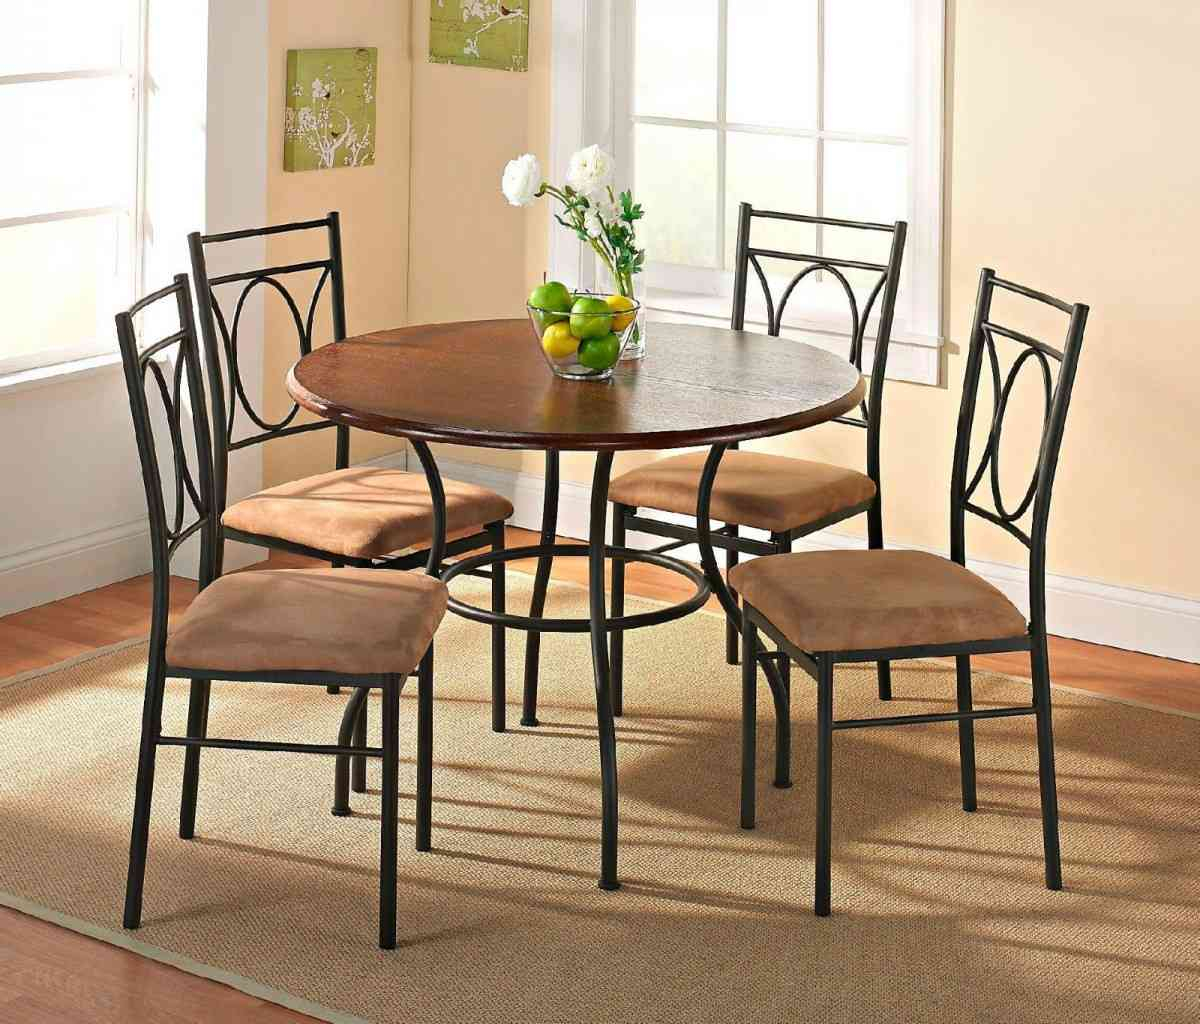 Chair Awesome Small Dining Table With Chairs pertaining to sizing 1200 X 1024